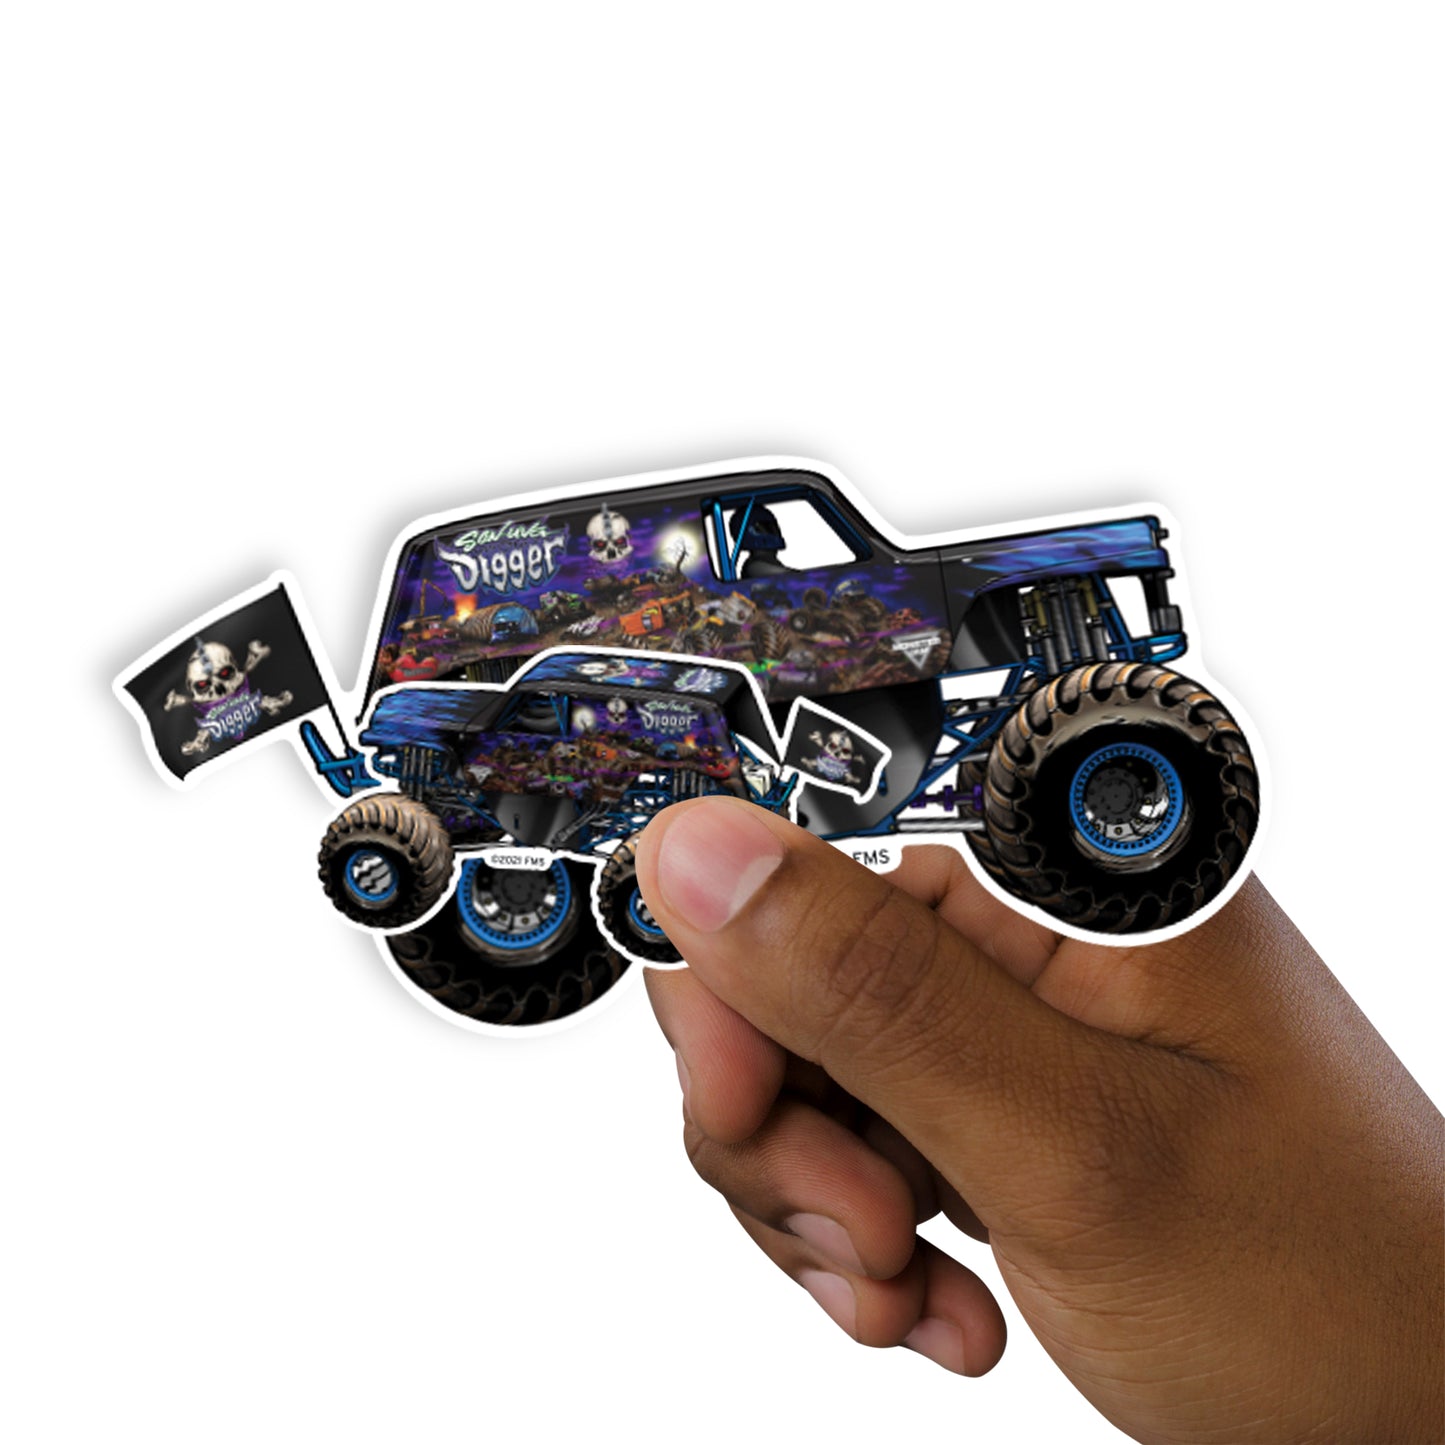 Sheet of 5 -Son Uva Digger Minis        - Officially Licensed Monster Jam Removable     Adhesive Decal